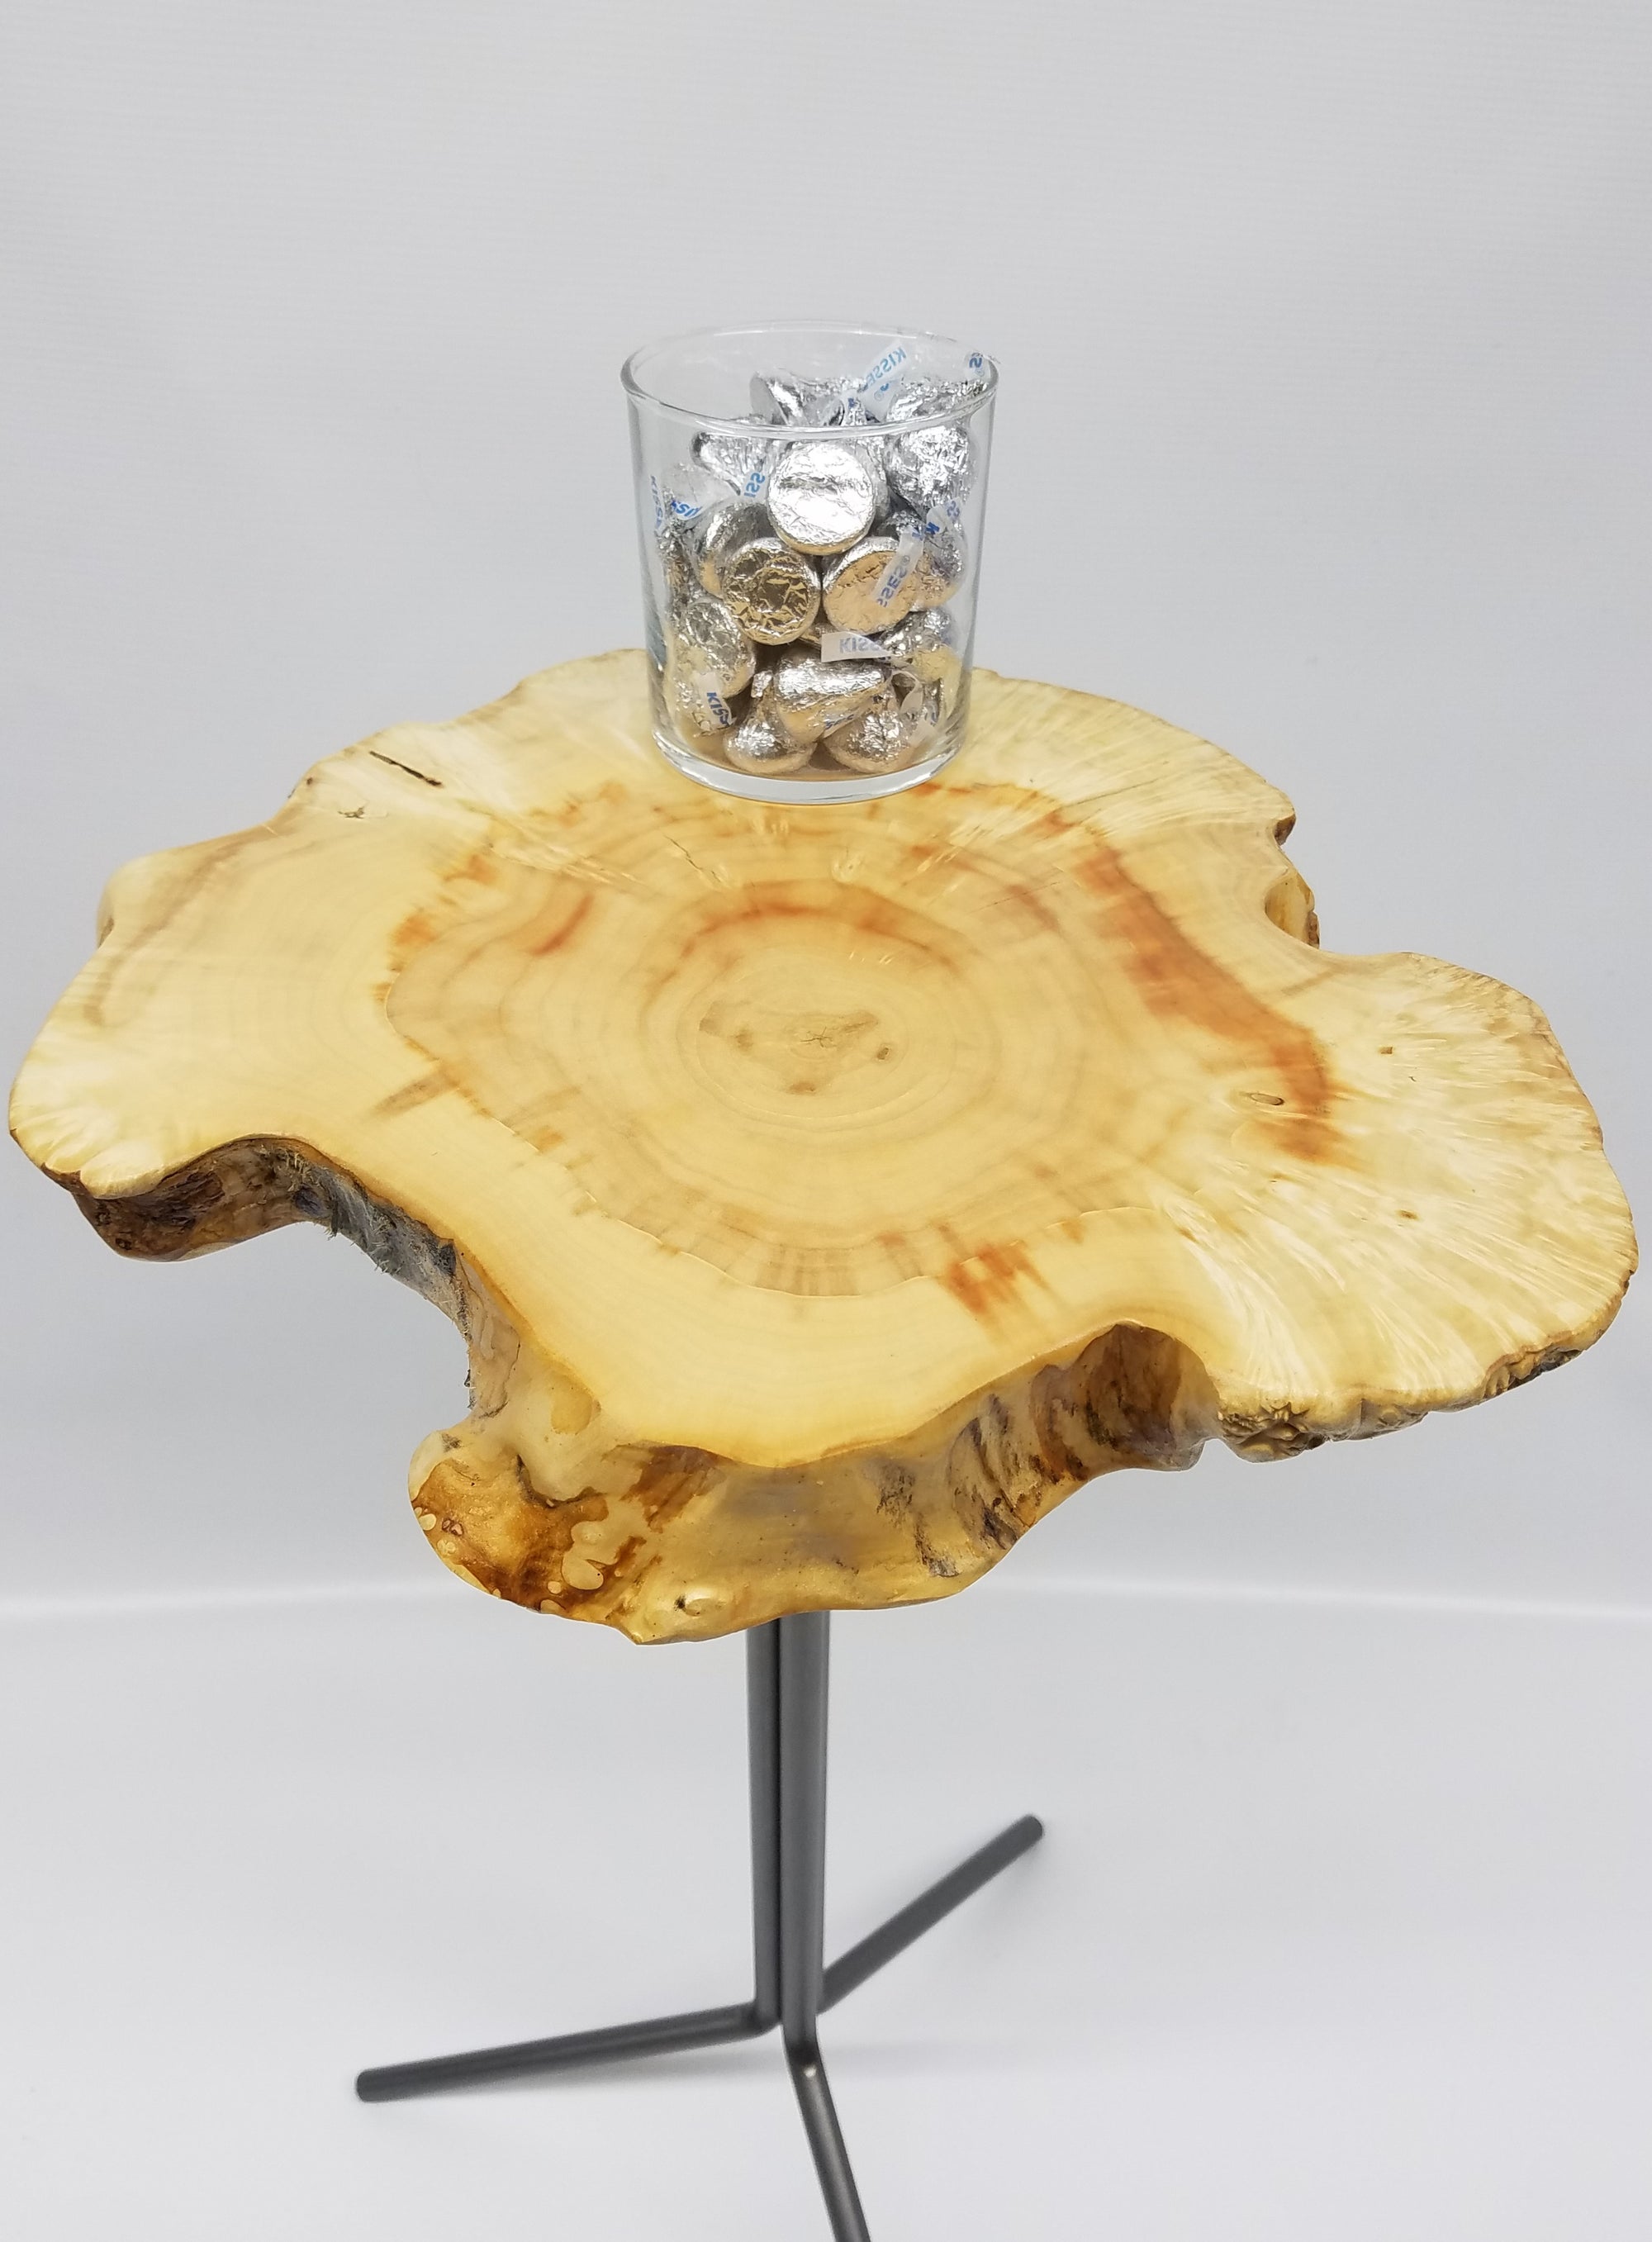 Small End Table- Drink Stand- Side Table- Maple Burl- Plant Stand- Foyer Table- Statuary Stand- Unique Furniture- Handmade Table- Slab Table